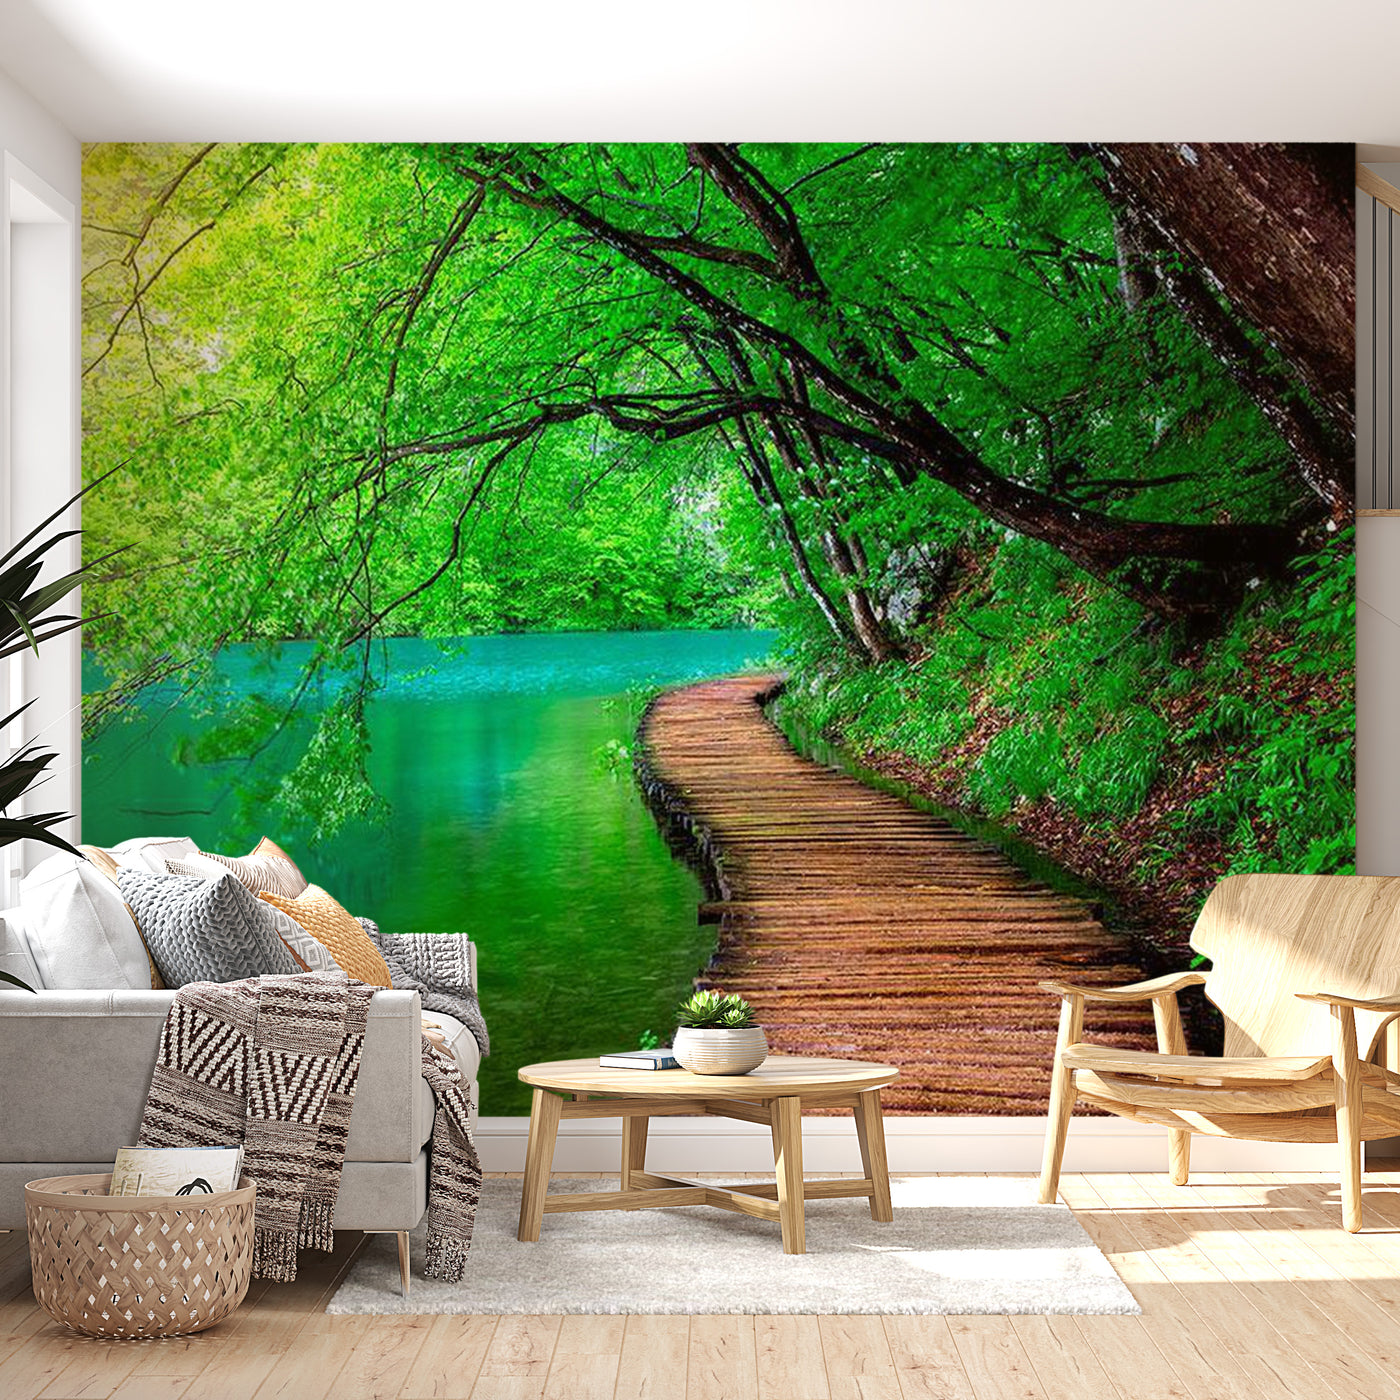 Peel & Stick Nature Wall Mural - Green Peace - Removable Wall Decals